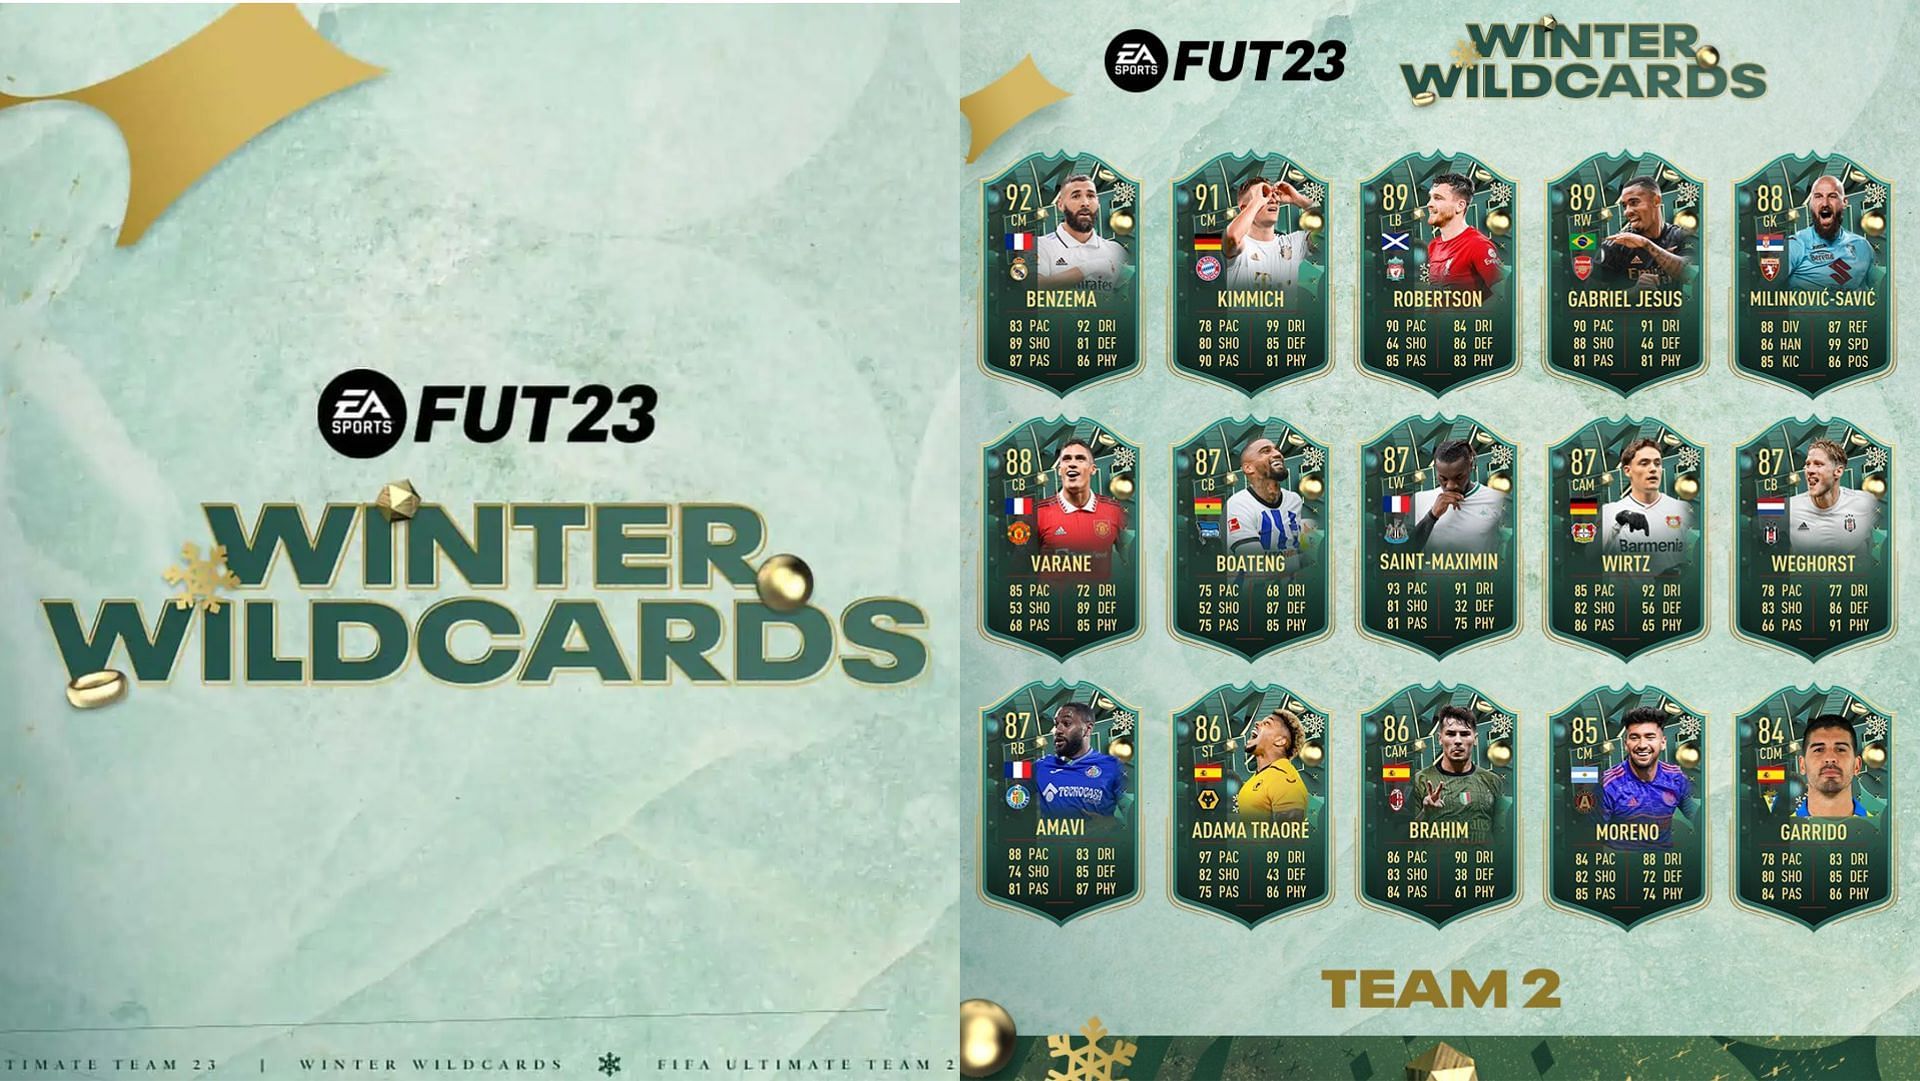 The second team for the ongoing Winter Wildcards promo has released (Images via EA Sports)